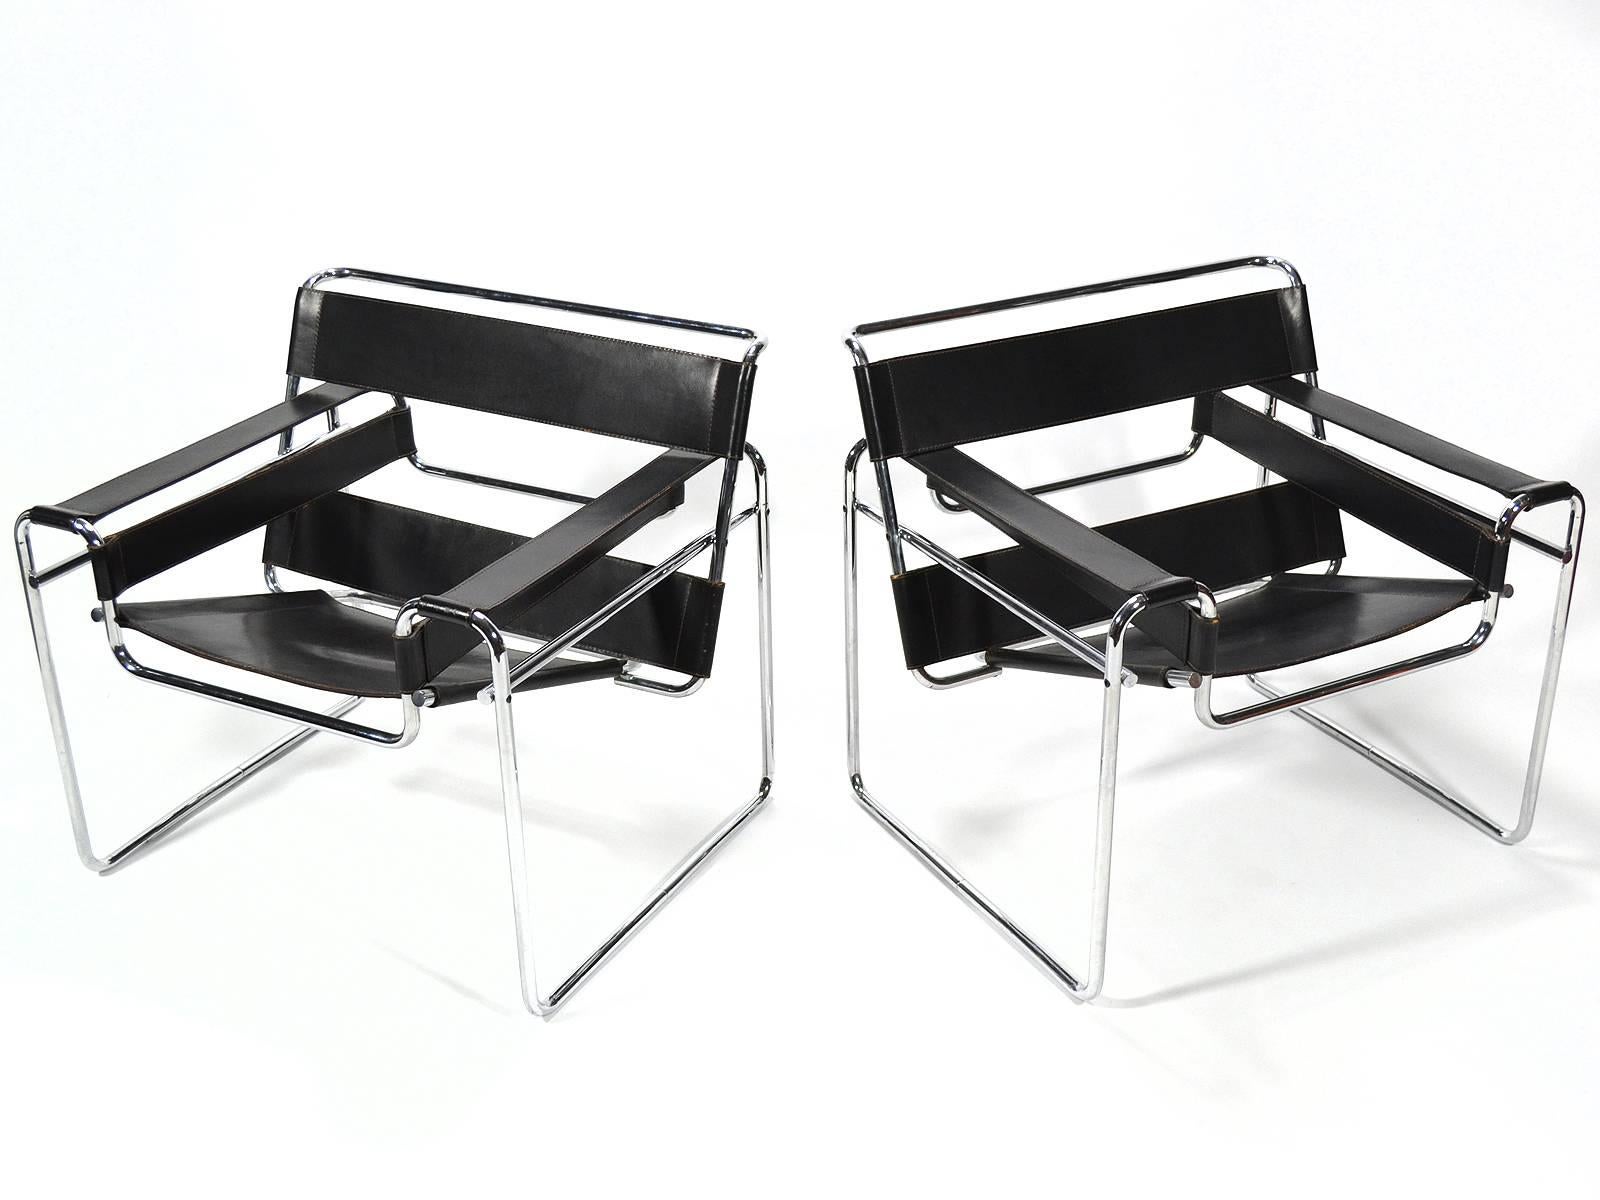 Marcel Breuer's 1925 design is a widely recognized masterpiece of modern furniture, having long ago achieved iconic status. This pair of Wassily chairs date to 1968, the year Knoll Associates became Knoll International, acquired Italian furniture